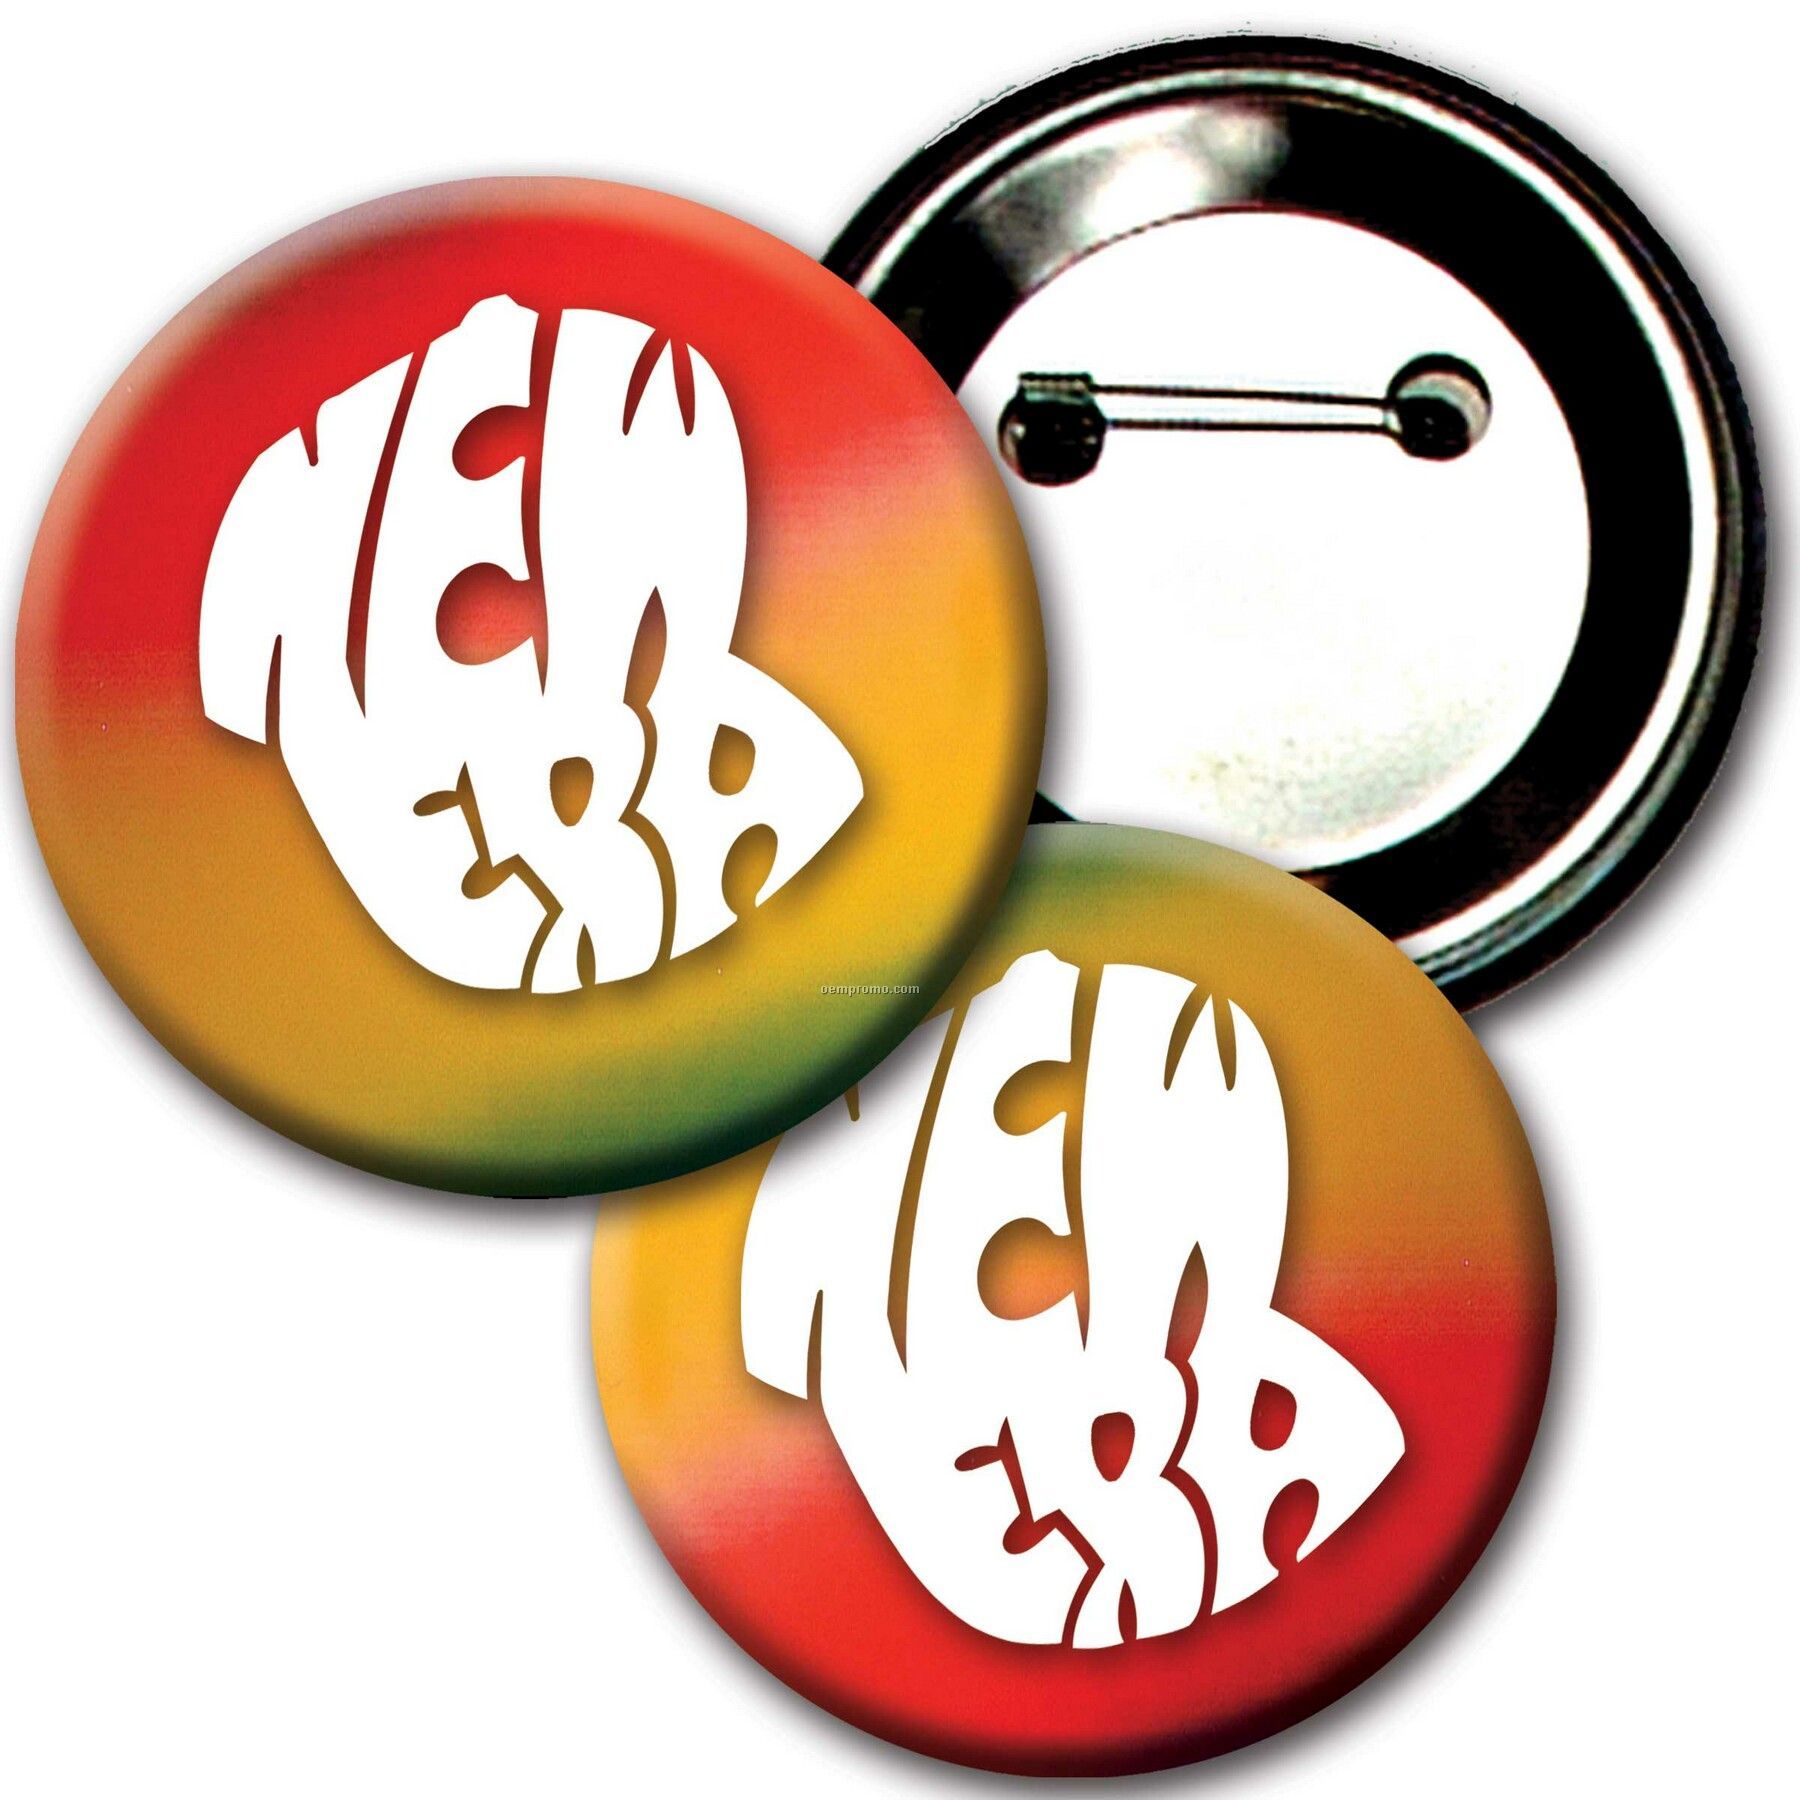 3" Diameter Buttons W/Changing Colors Lenticular Effects (Imprinted)